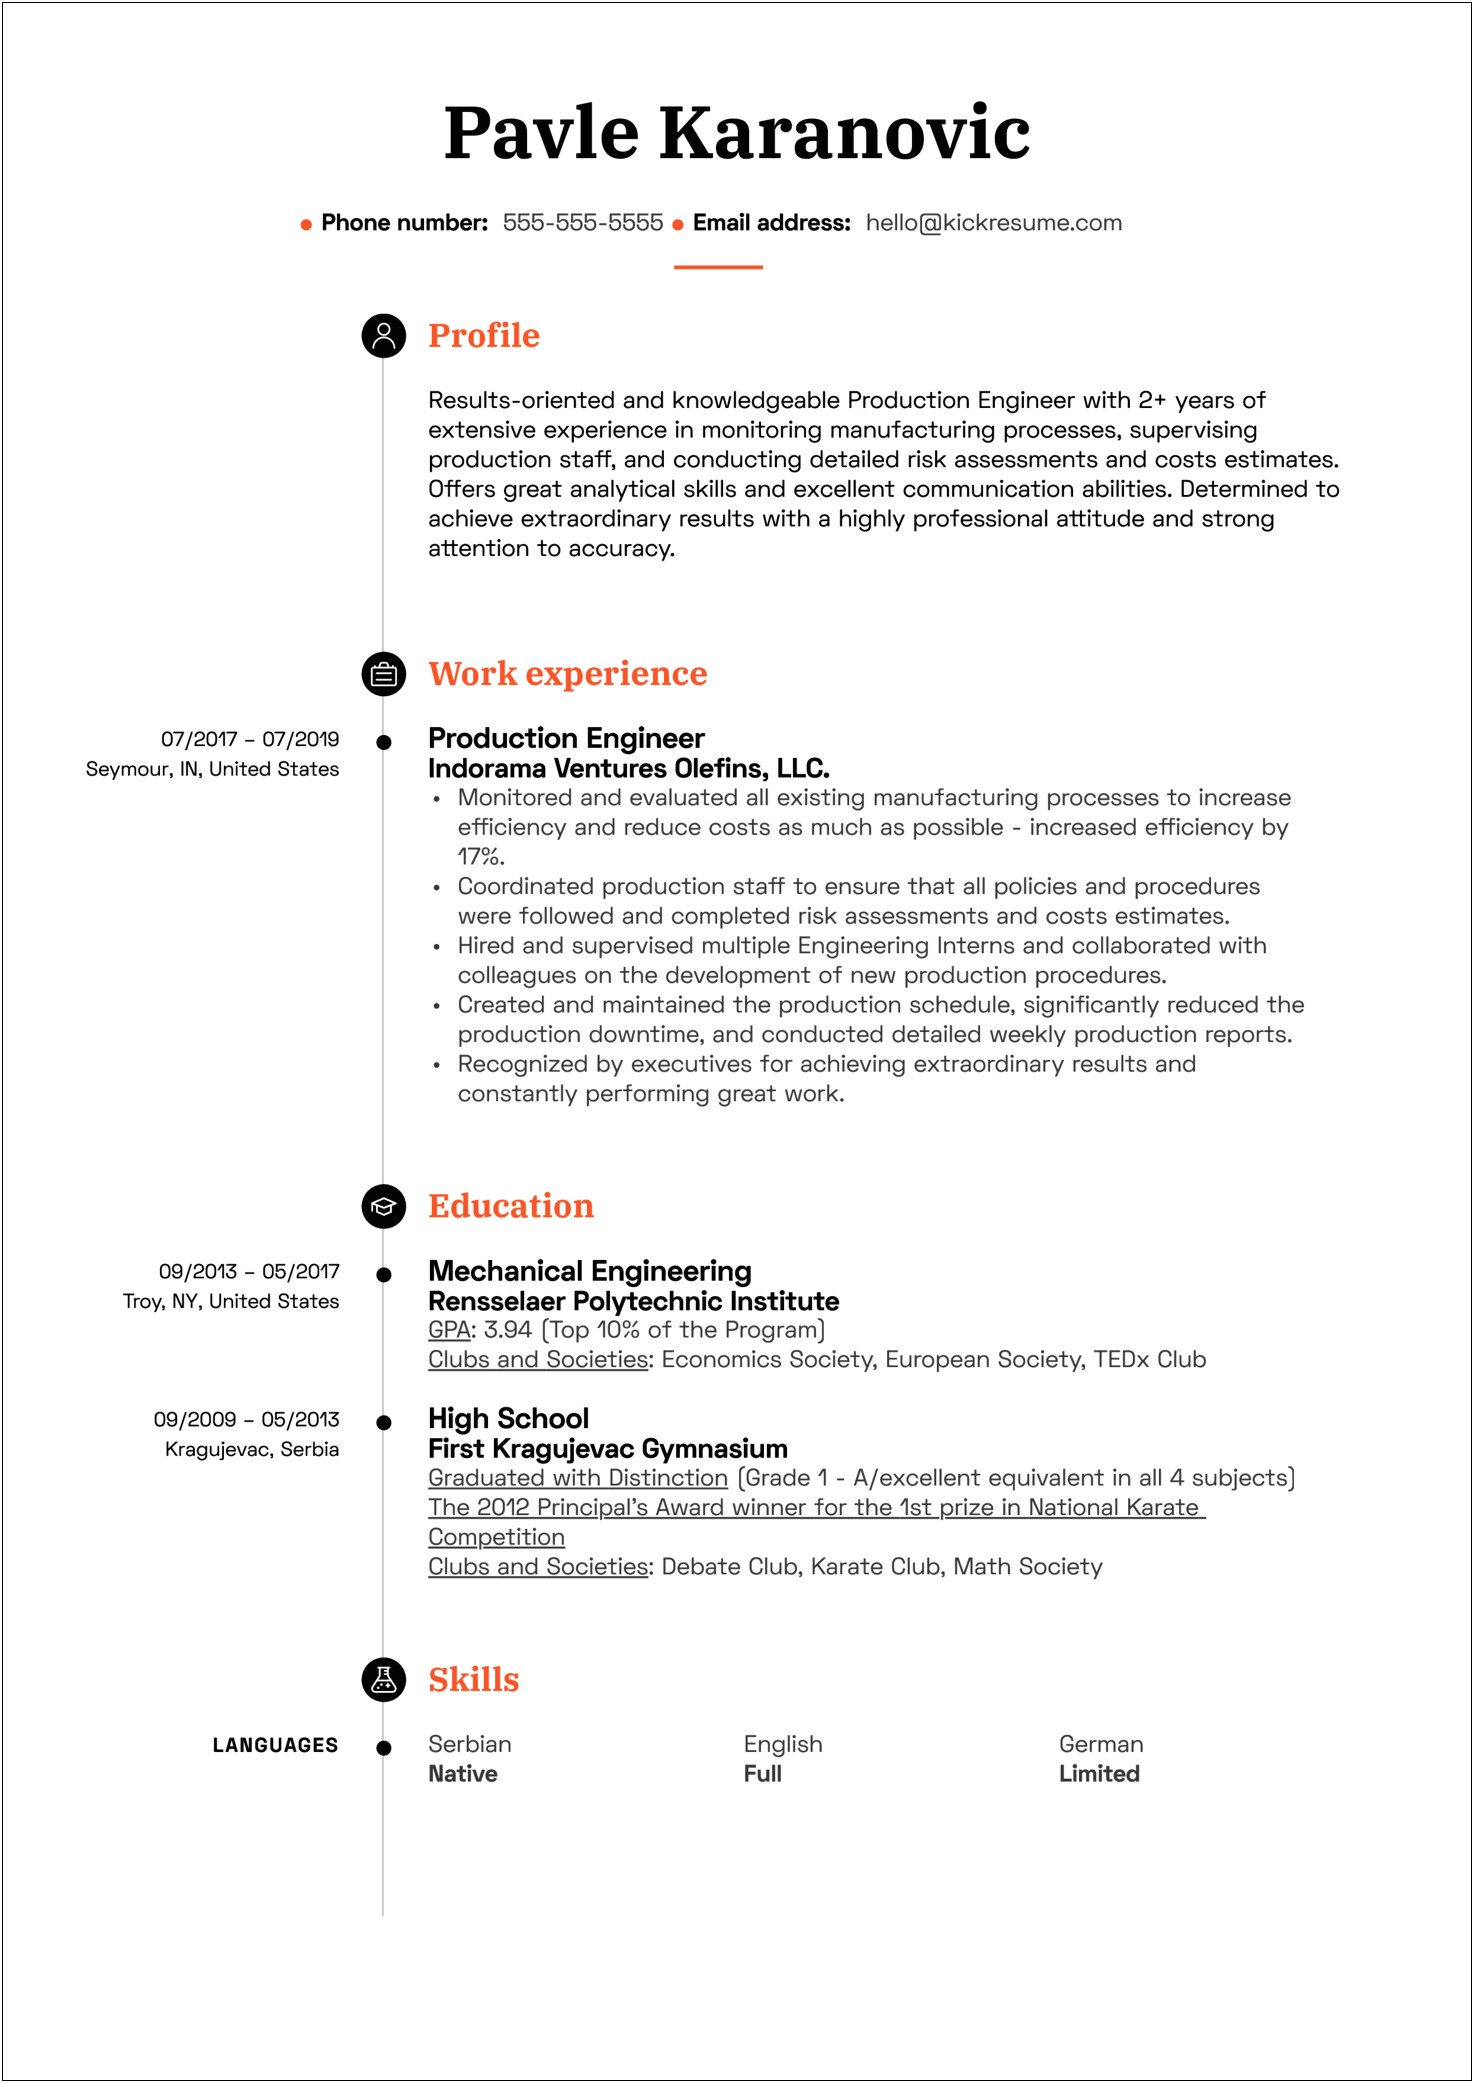 Mechanical Experience Resume Format Free Download